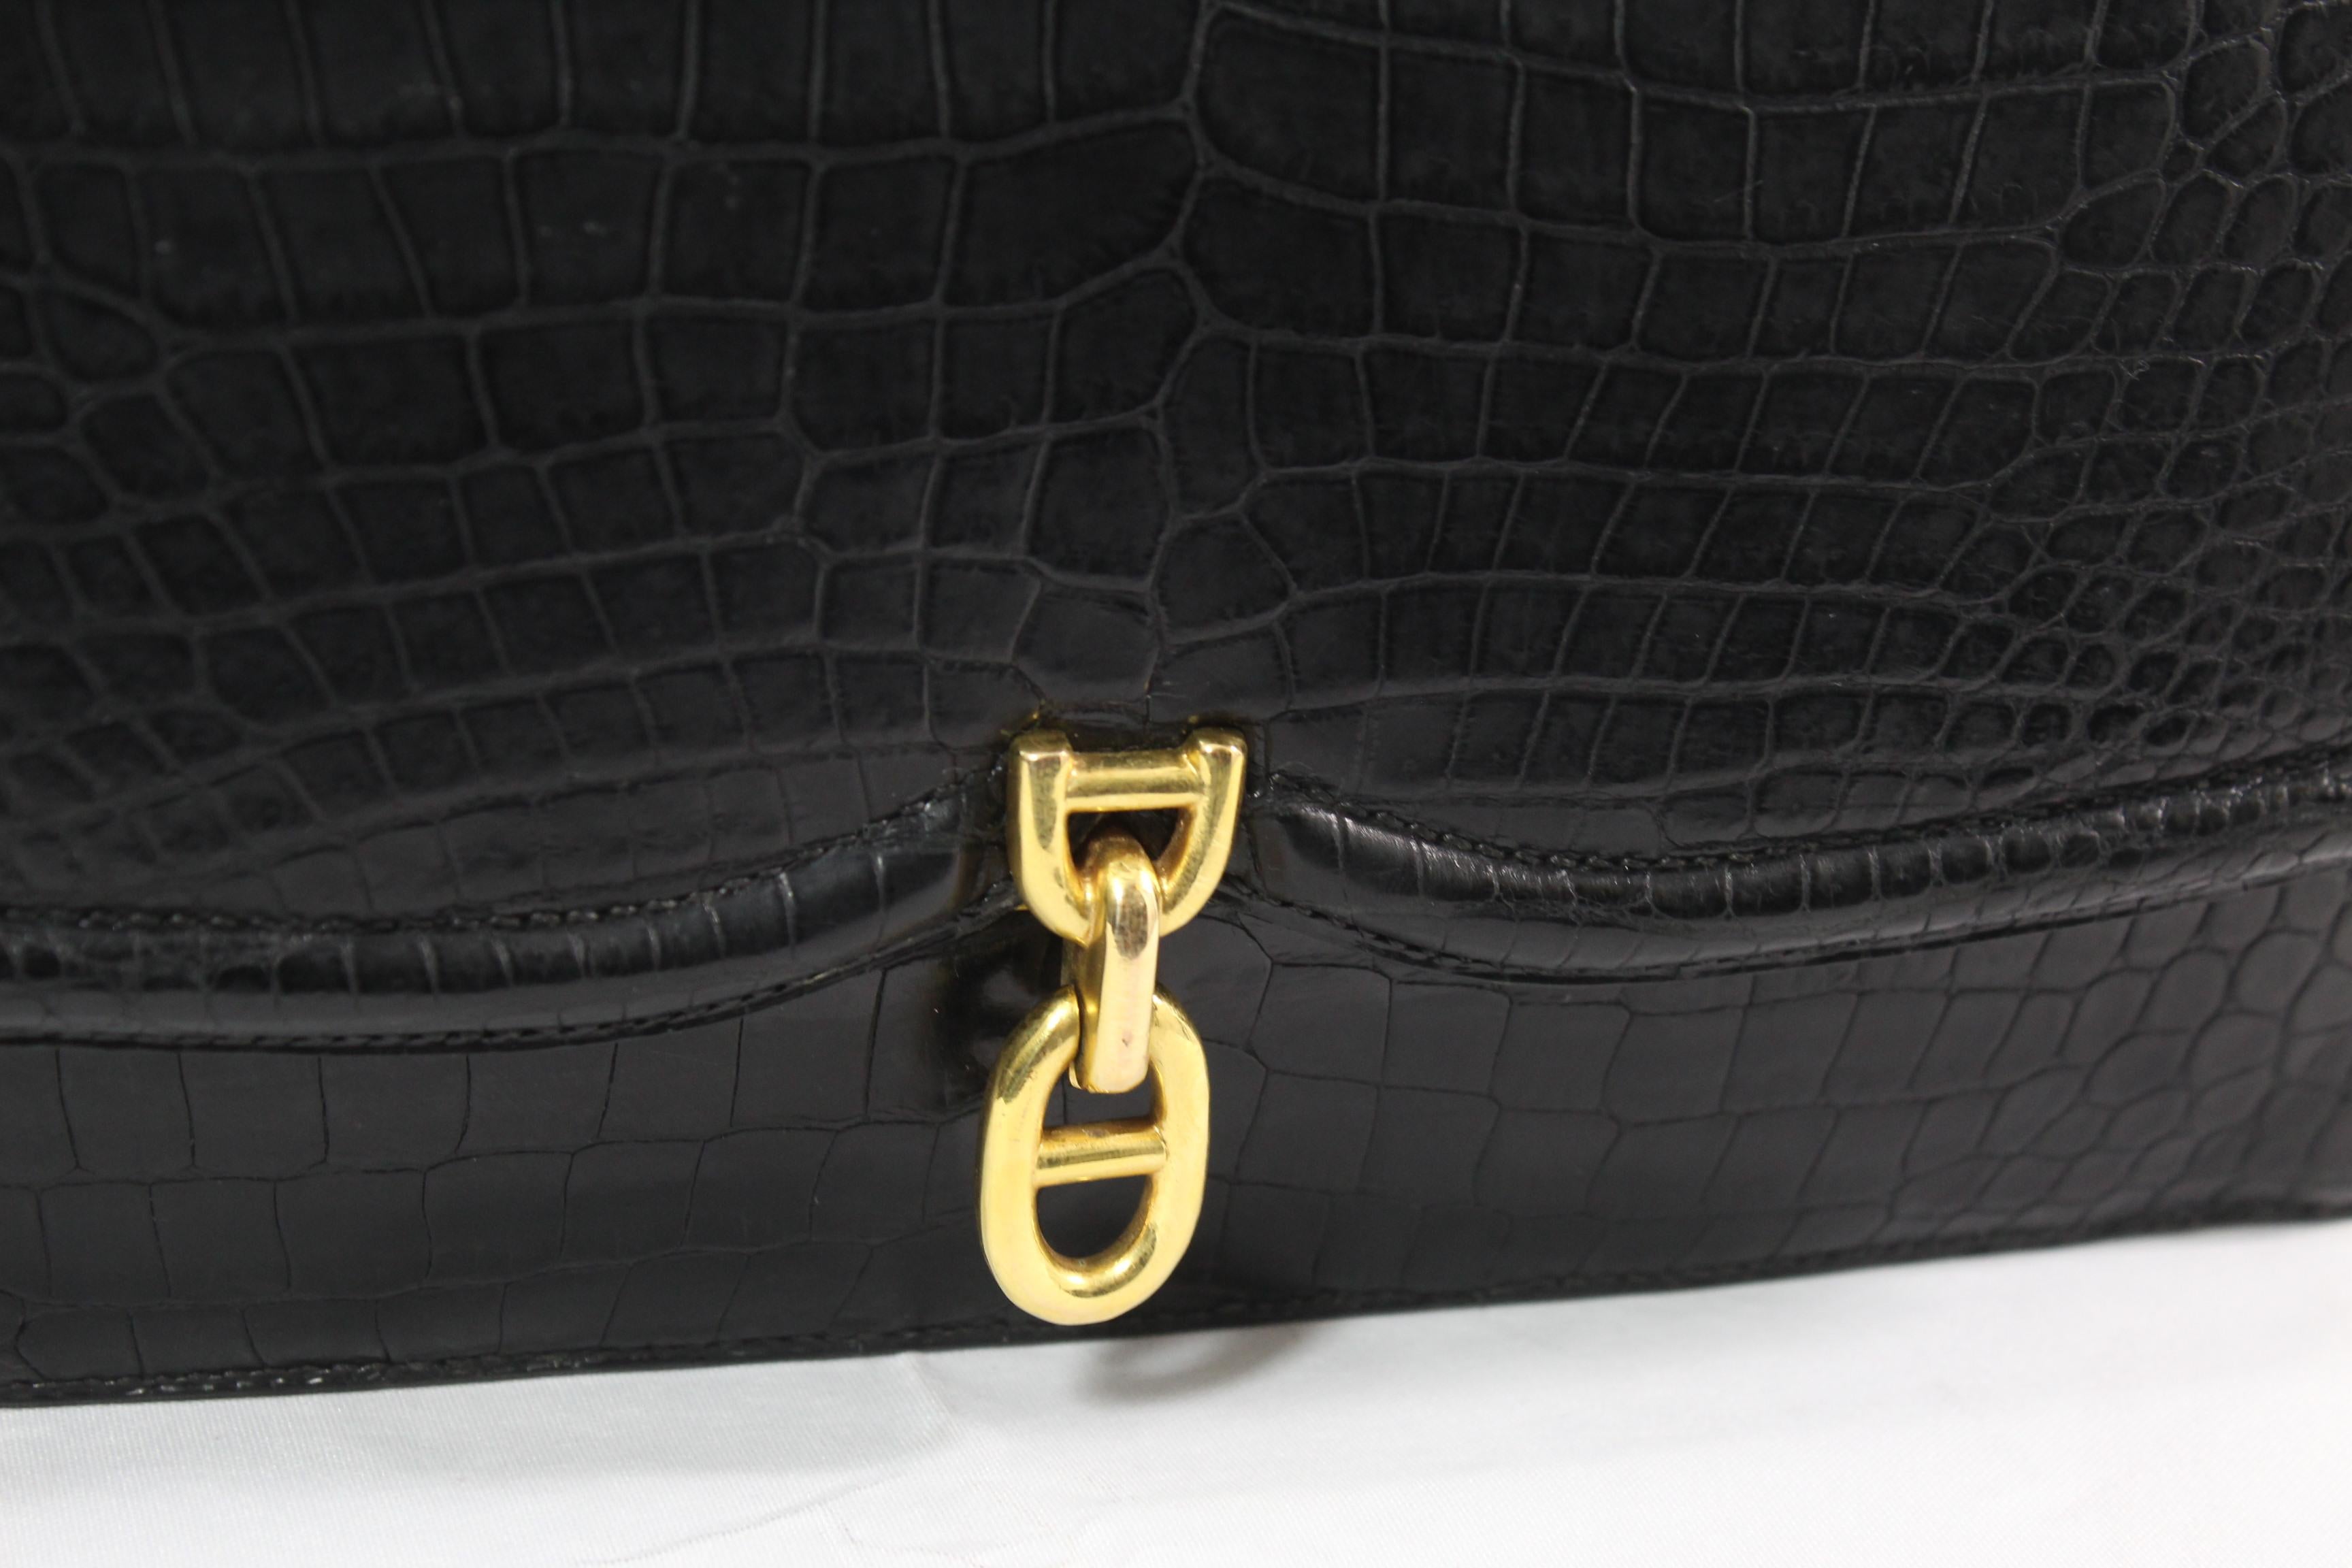 Nice Vintage hermes bag in crocodile and black leather with golden hardware.
Good vintage condition
Signature Hermes paris (bag from the 60's)
No Cites. So check your country regulatiion regarding the importation of exotic leather
Size 10x7 inches